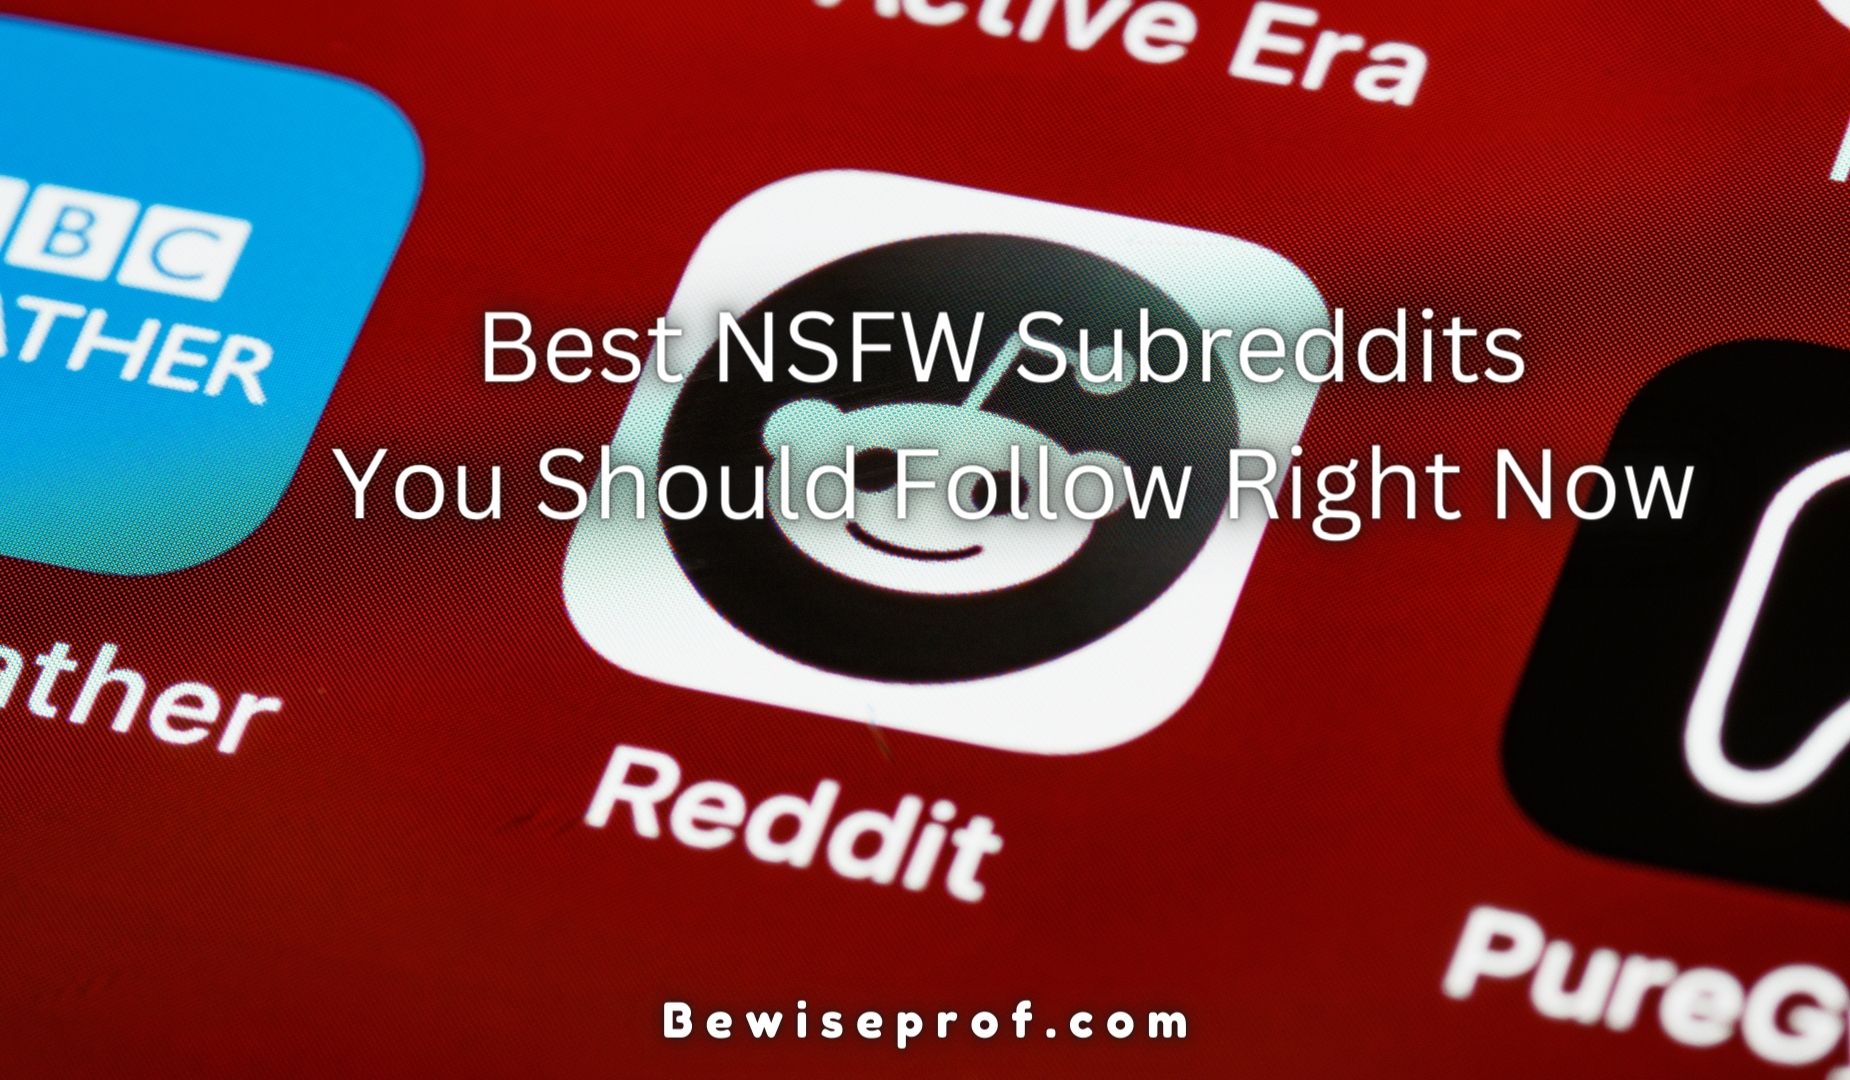 Best NSFW Subreddits You Should Follow Right Now